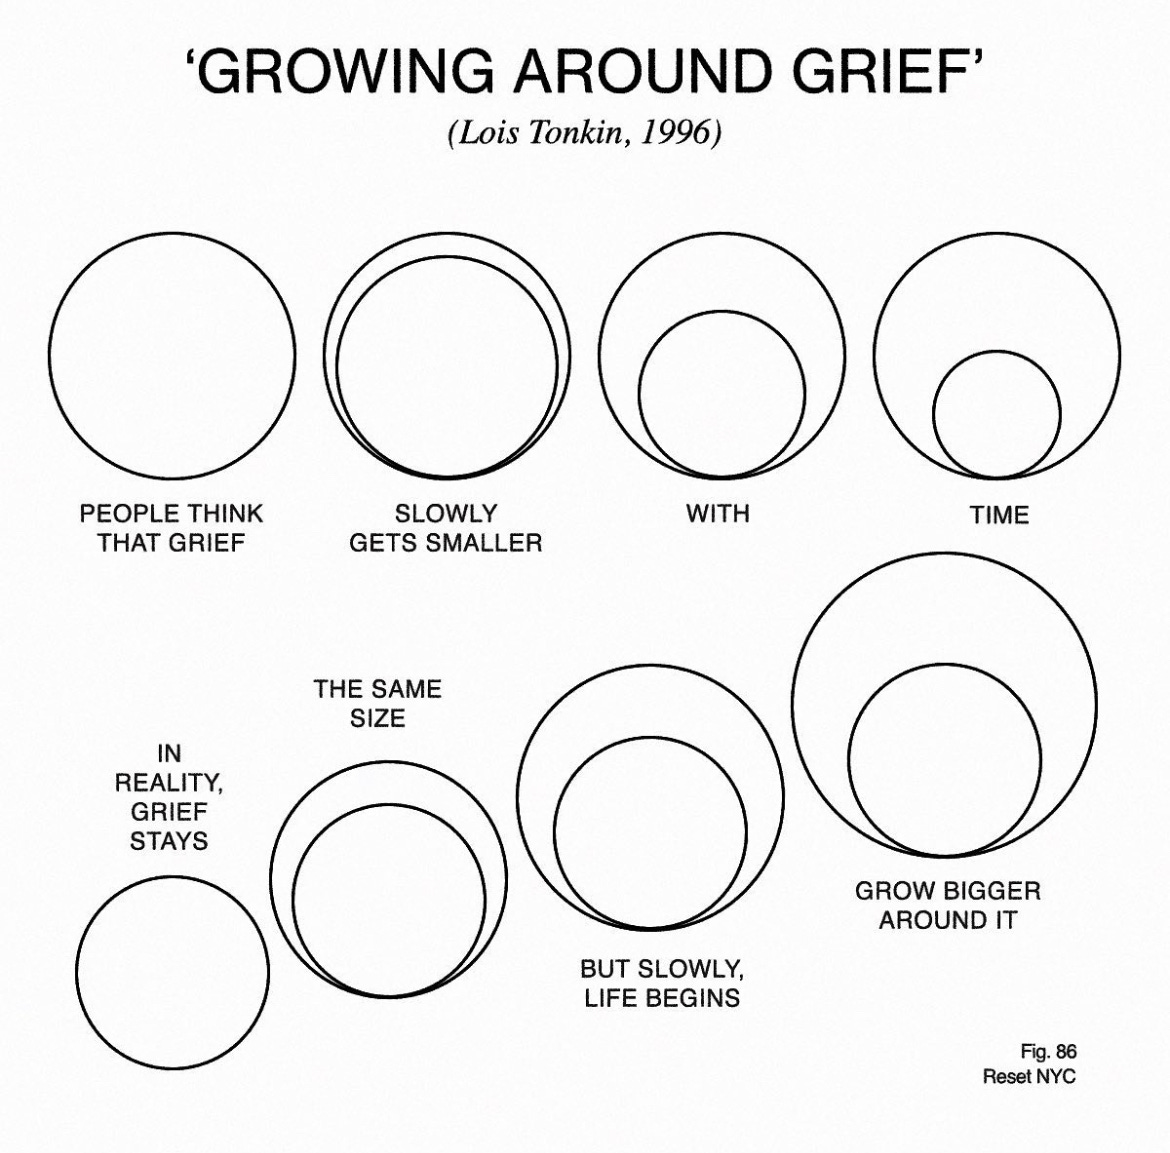 reimagined figure of 'growing around grief' which was conceptualized by lois tonkin, 1996. figure is by resent nyc and features grief and life as concentric circles. text reads: people that that grief slowly gets smaller with time. in reality, grief stays the same size but slowly life begins to grow bigger around it